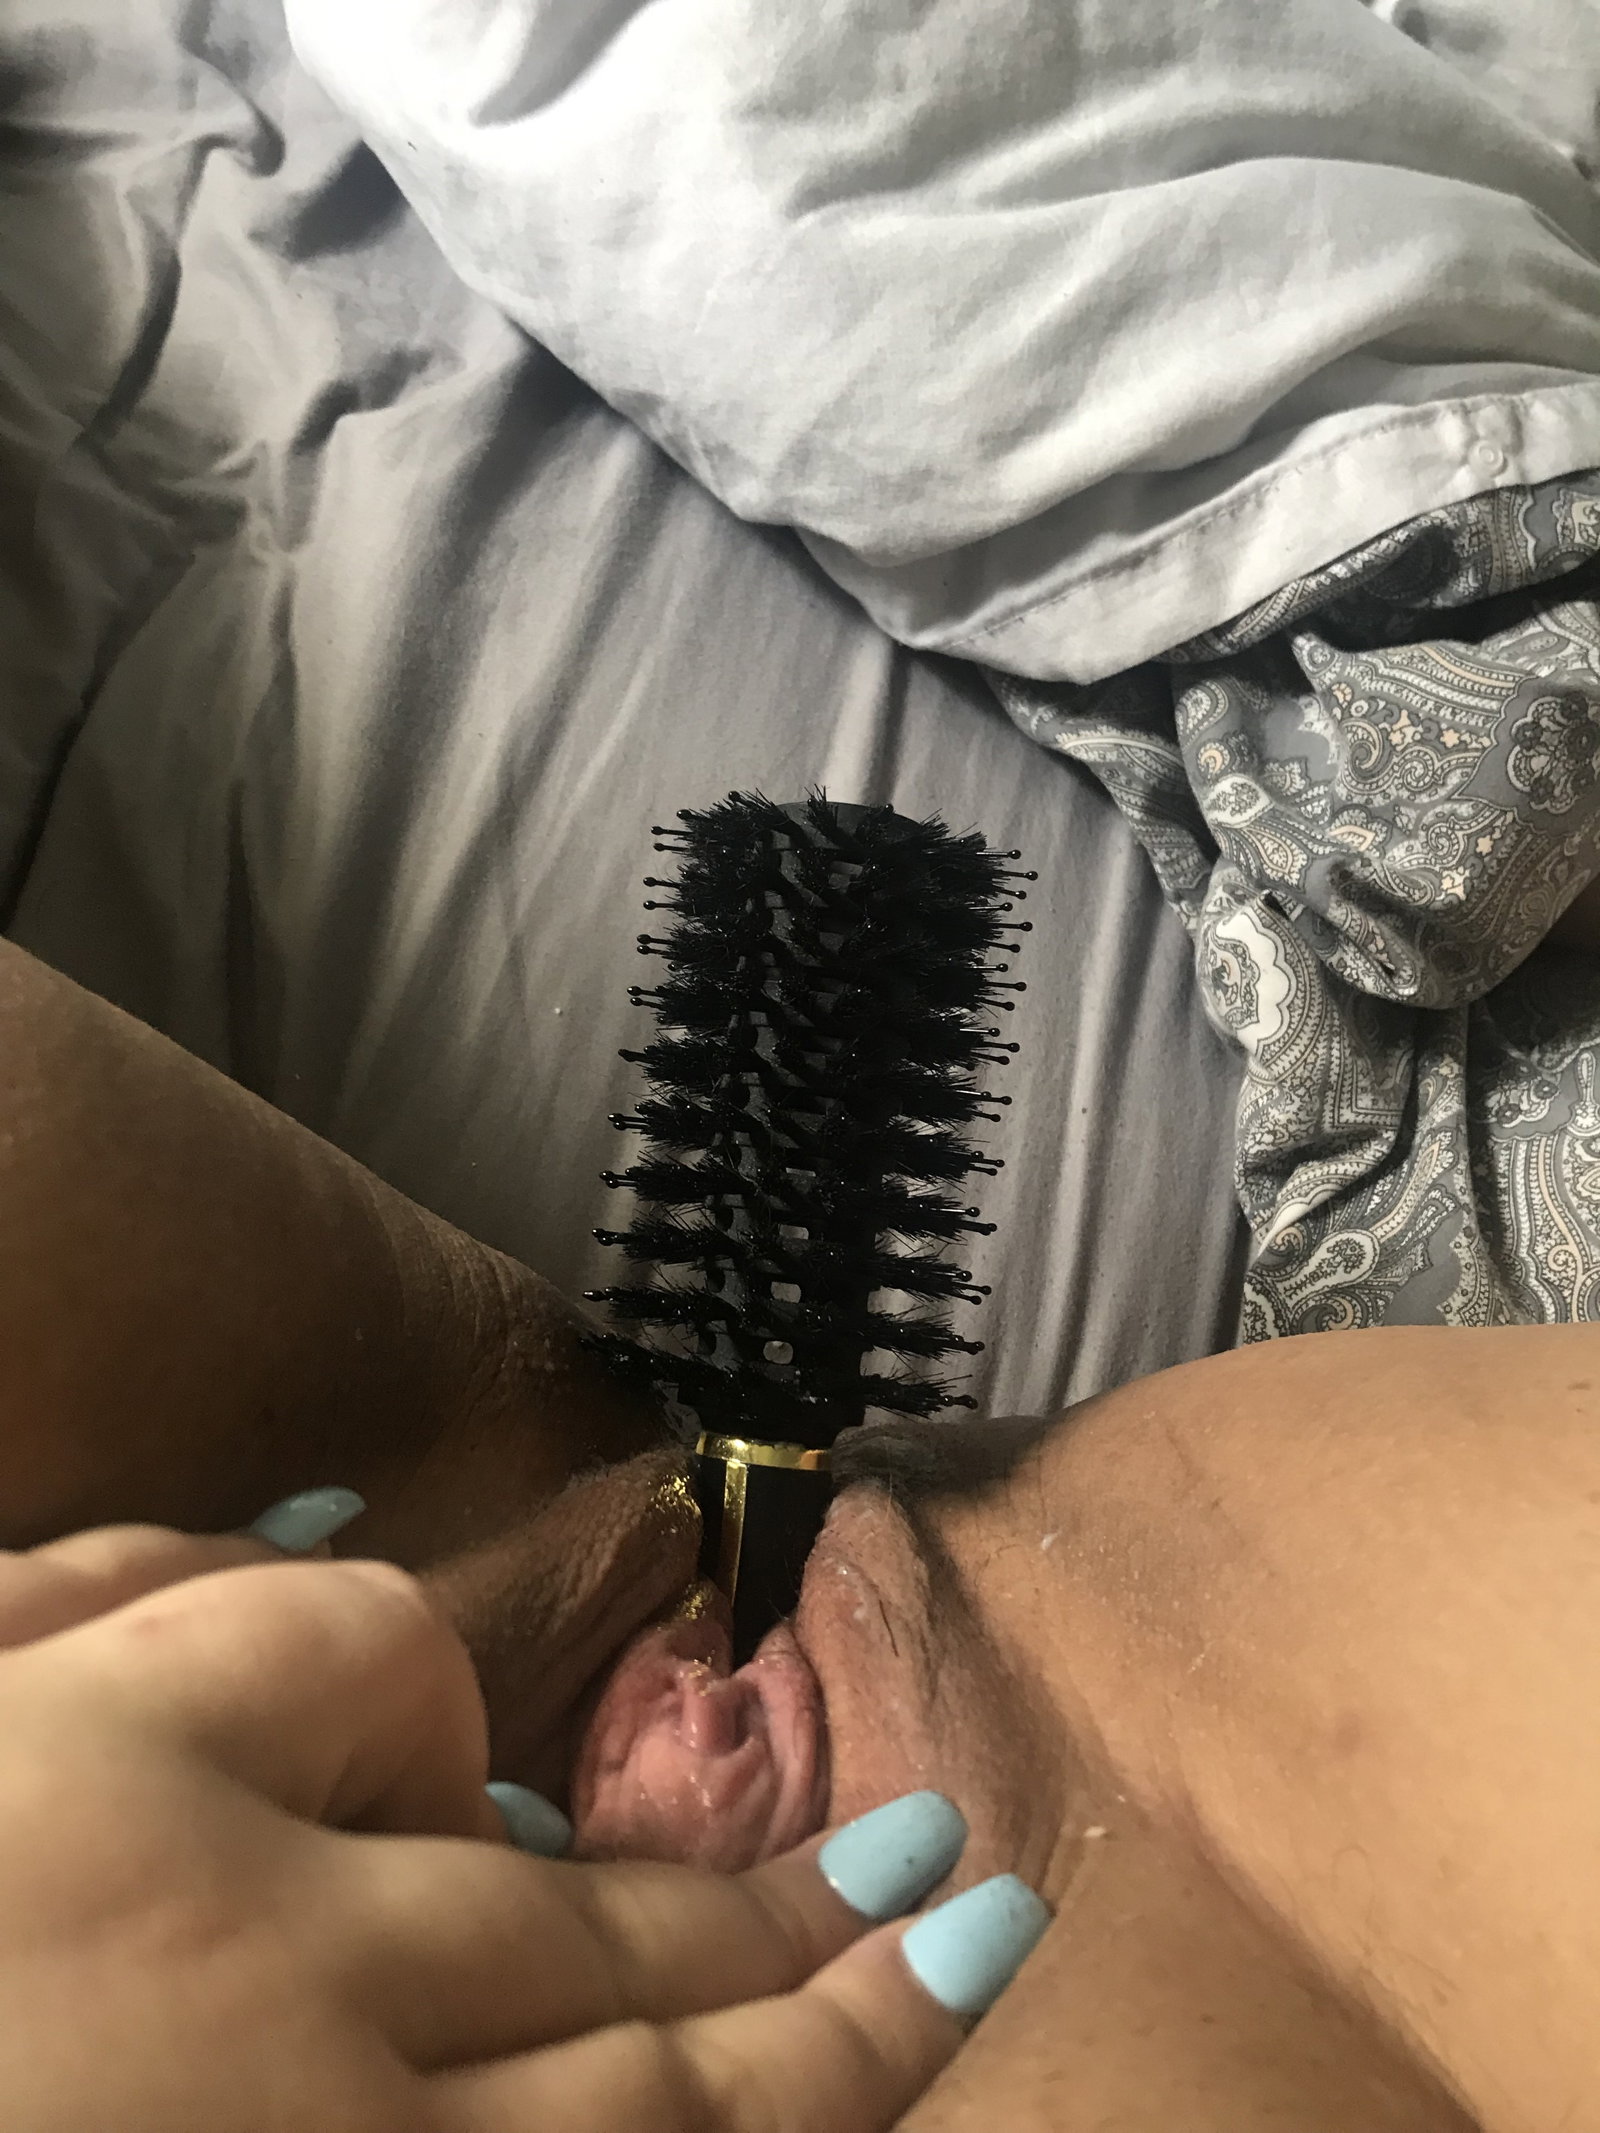 Watch the Photo by wetbabygrrrl with the username @wetbabygrrrl, who is a verified user, posted on July 20, 2019 and the text says 'Had a little fun this morning Fucking myself with my hairbrush'